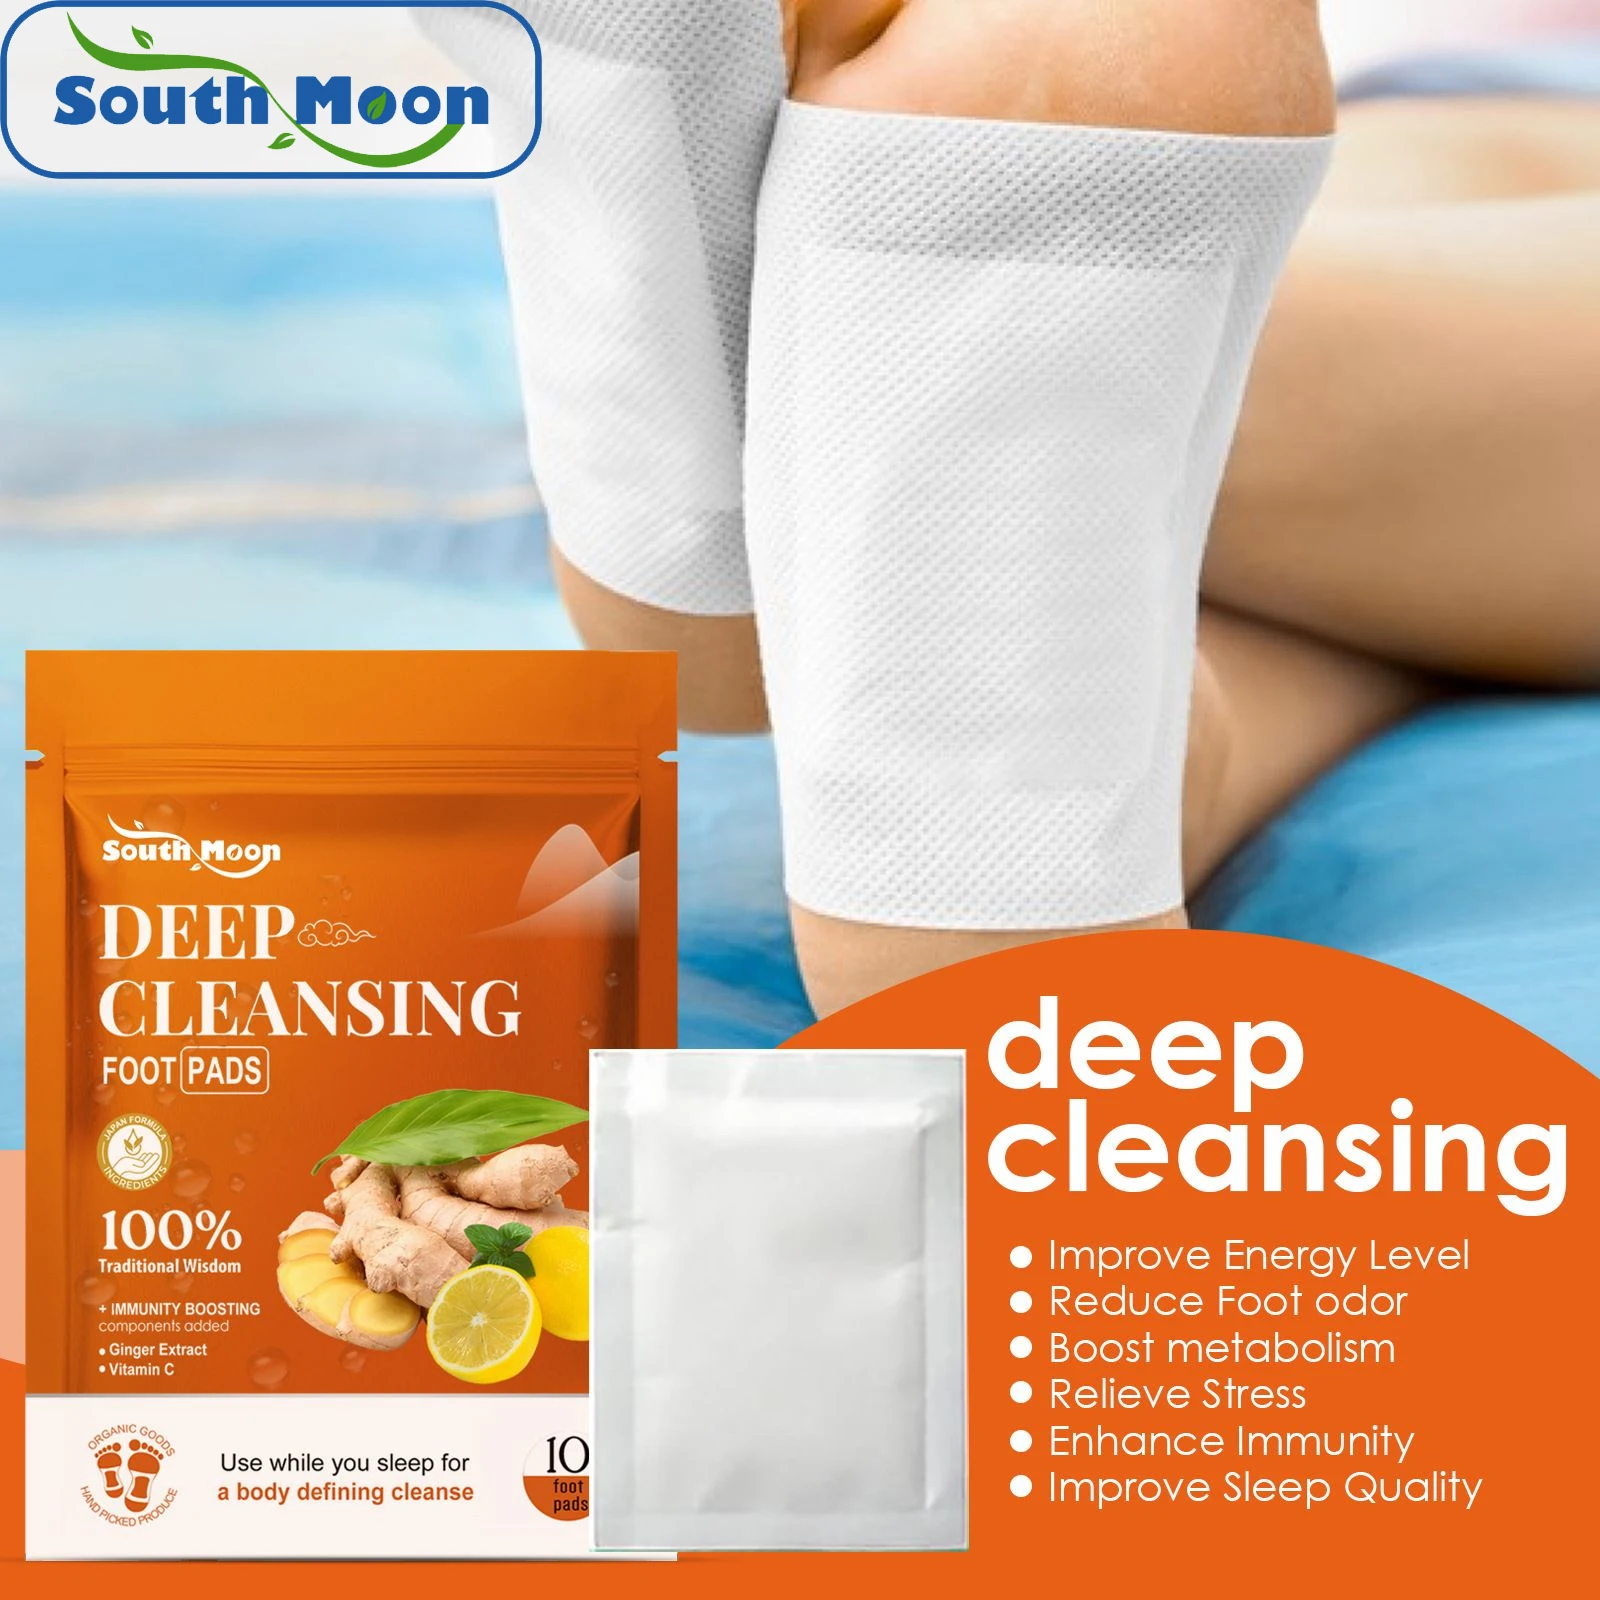 South Moon Ginger Deep Detox Foot Pads Natural Herbal Relief Stress Improve Sleep Cleansing Detox Slimming Foot Care Tool 10pcs